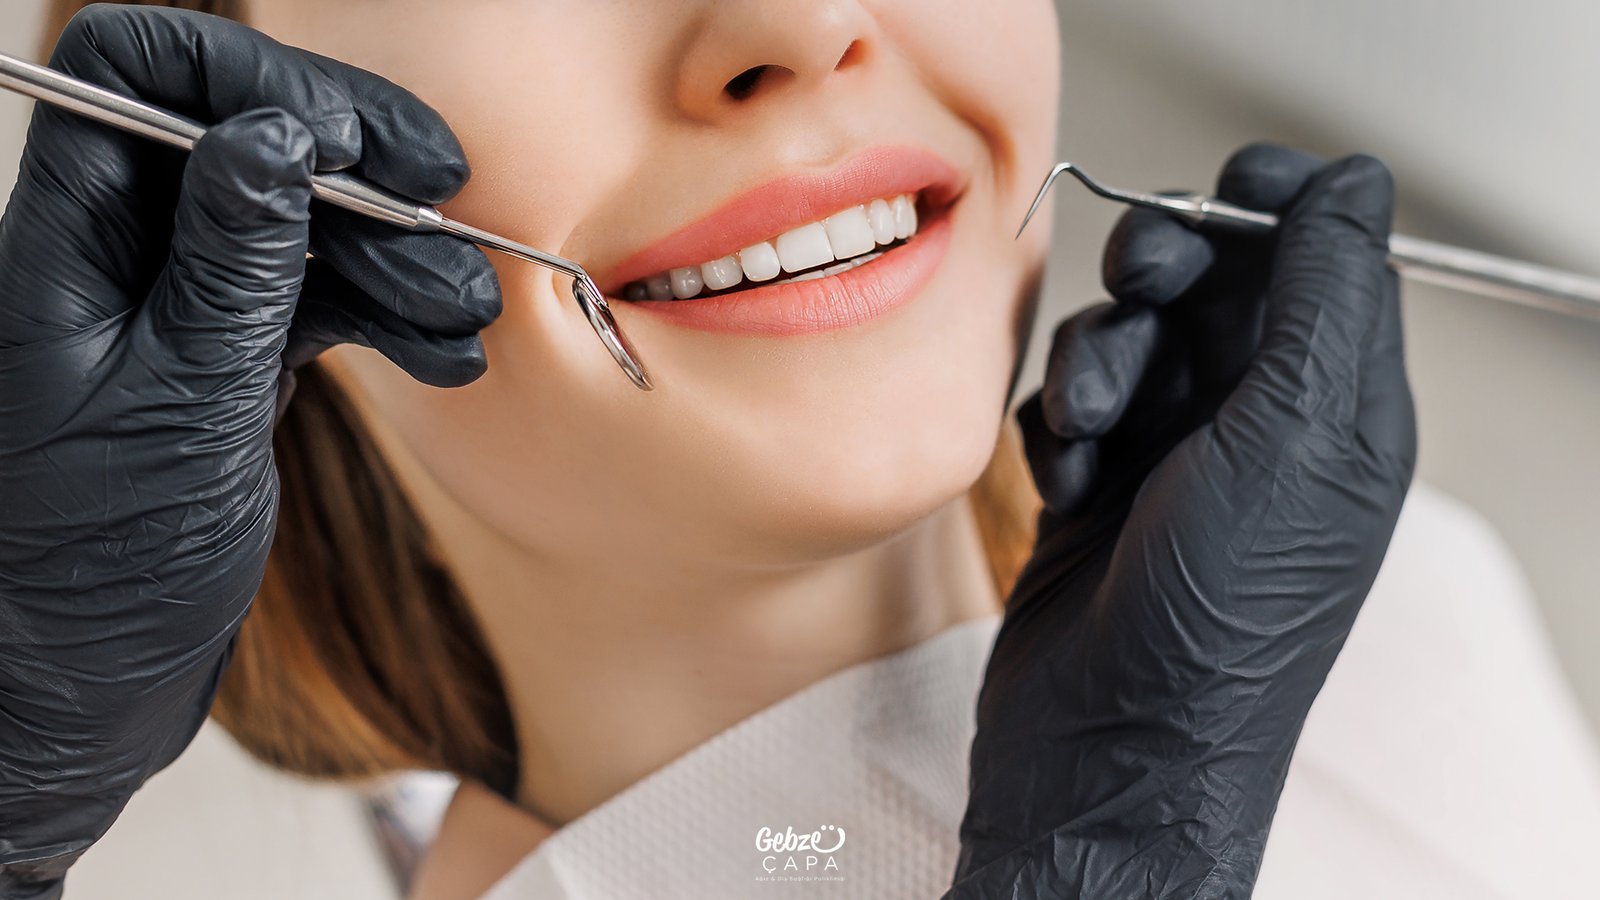 How Long Does a Dental Filling Take?